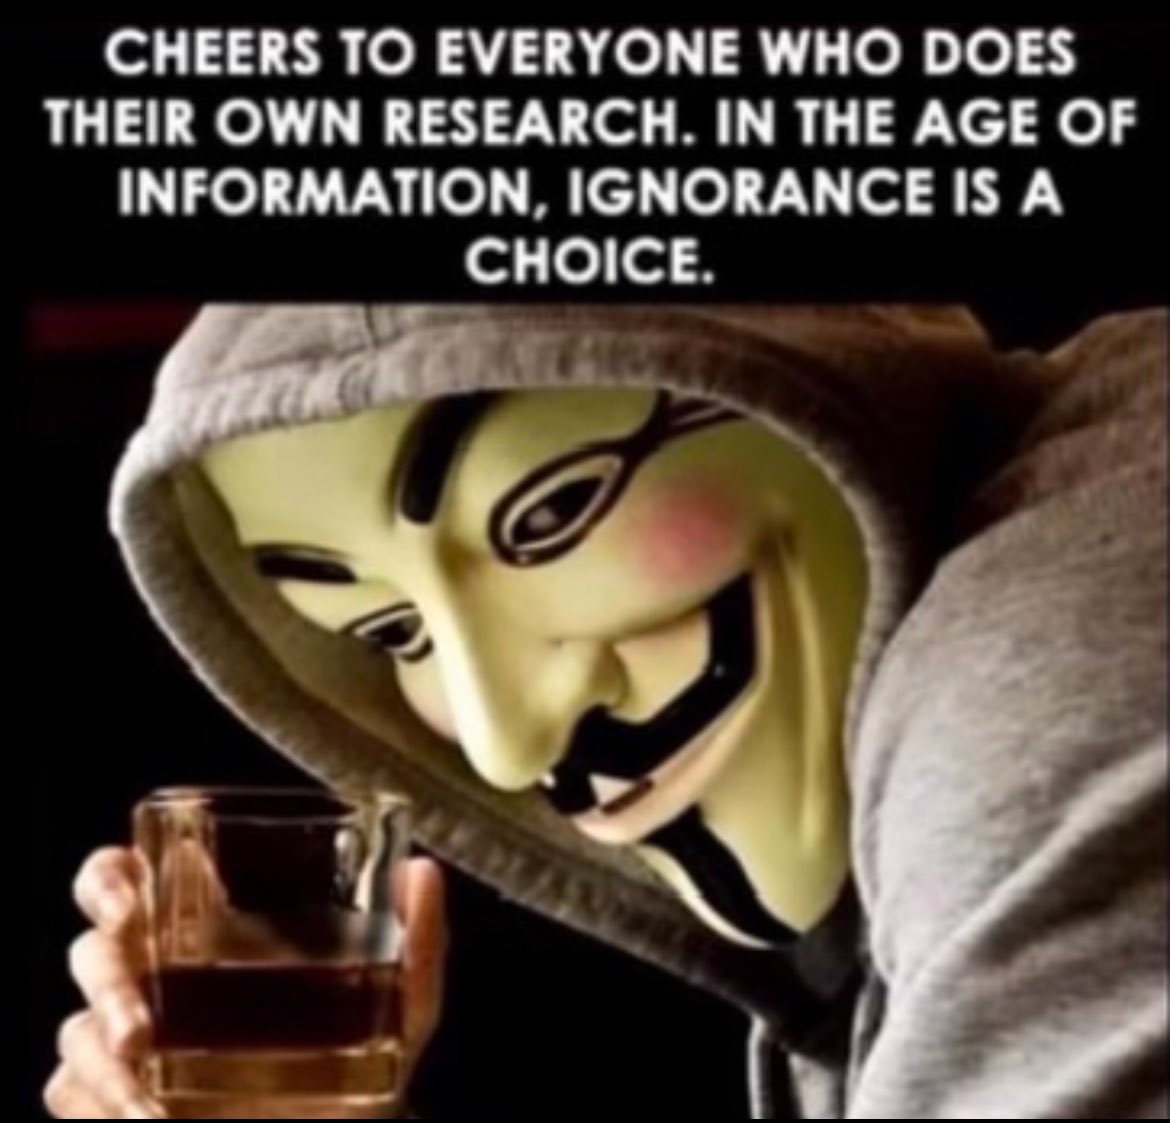 Cheers to everyone who does their own research. In the age of information, ignorance is a choice.
#TheGreatAwakeningIsUponUs 
#SaveTheChildrenWorldWide